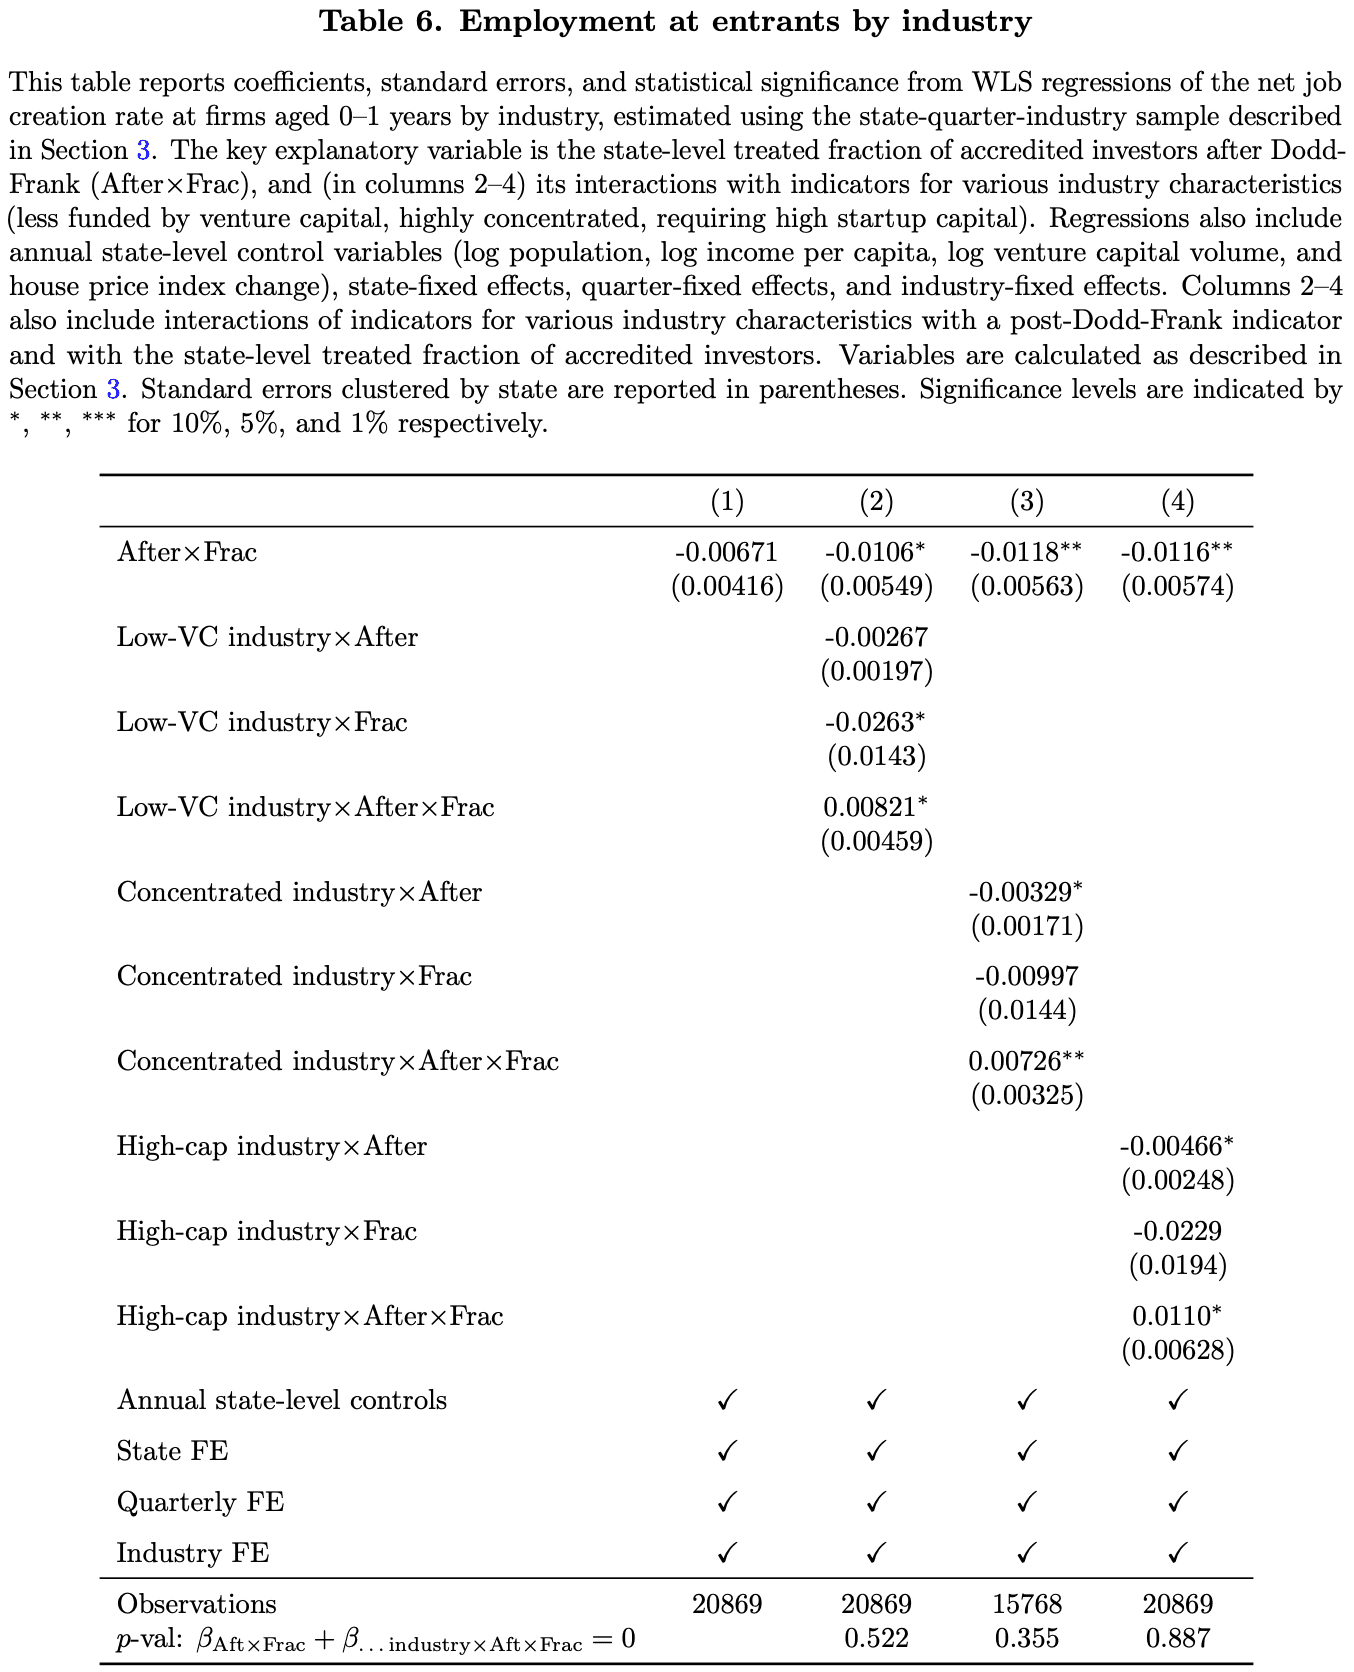 Table 6 from Lindsey and Stein (2019 WP)